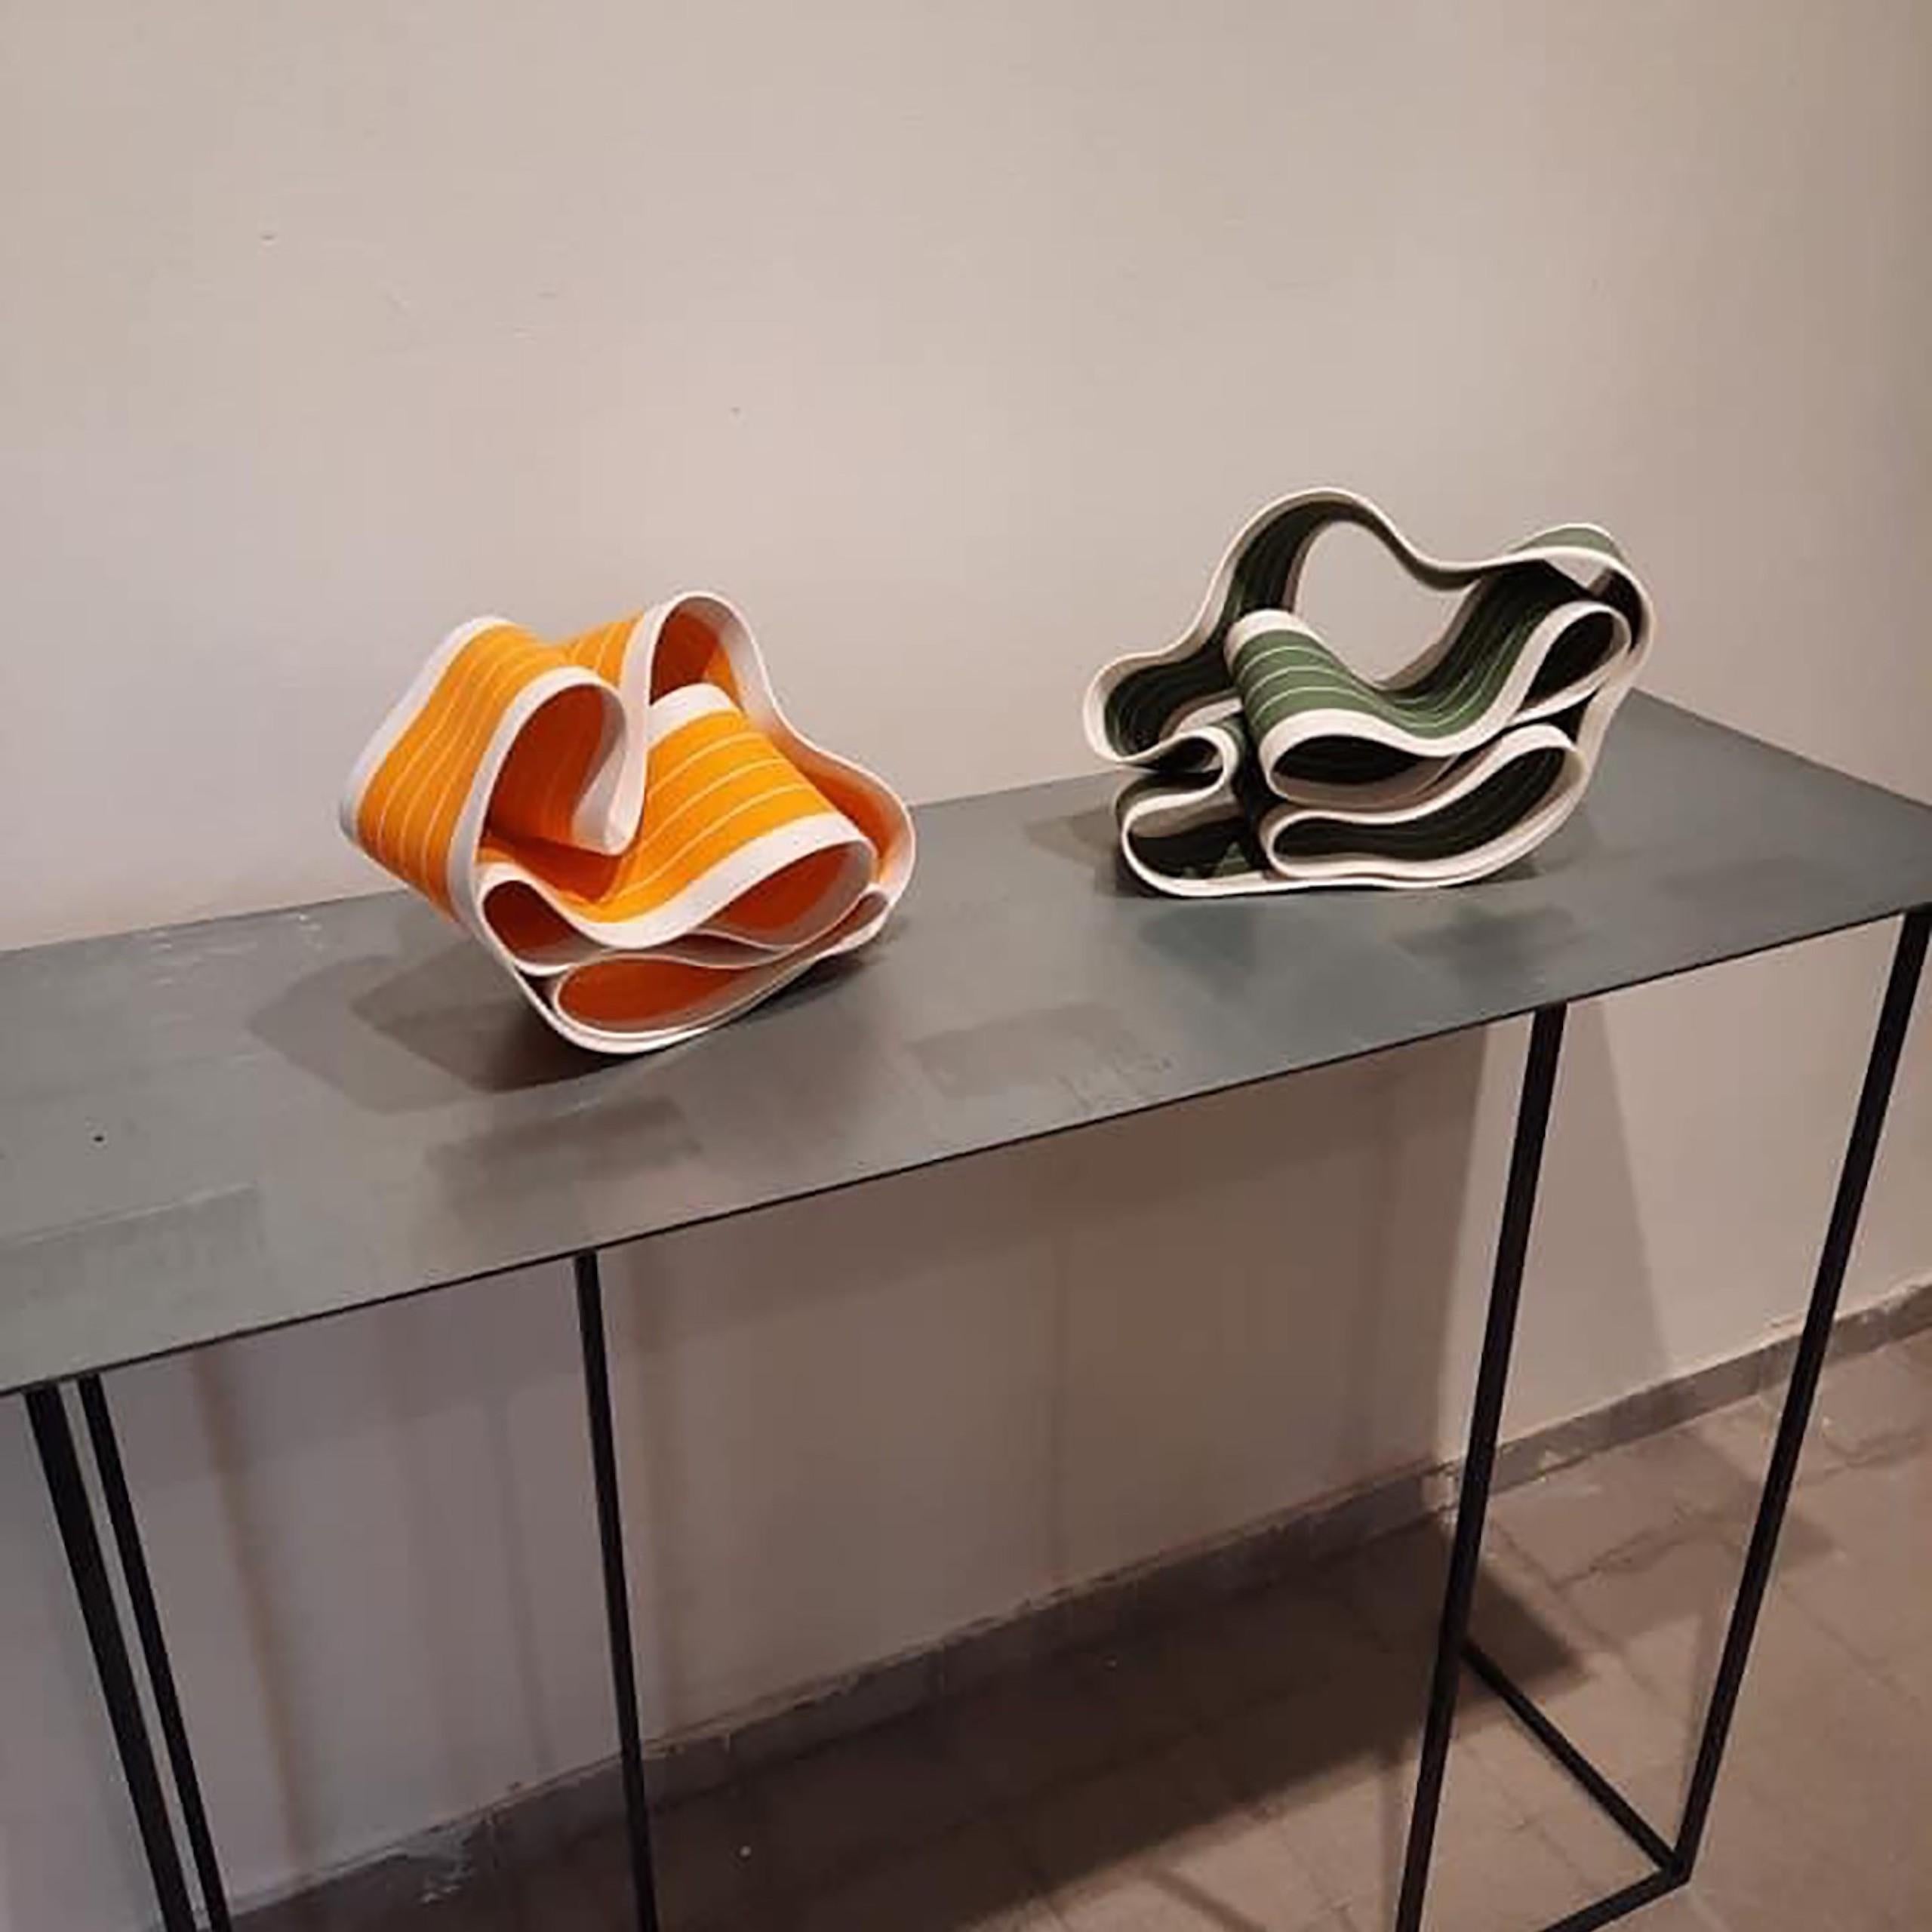 Folding in Motion 4 by Simcha Even-Chen - Porcelain sculpture, green lines For Sale 2